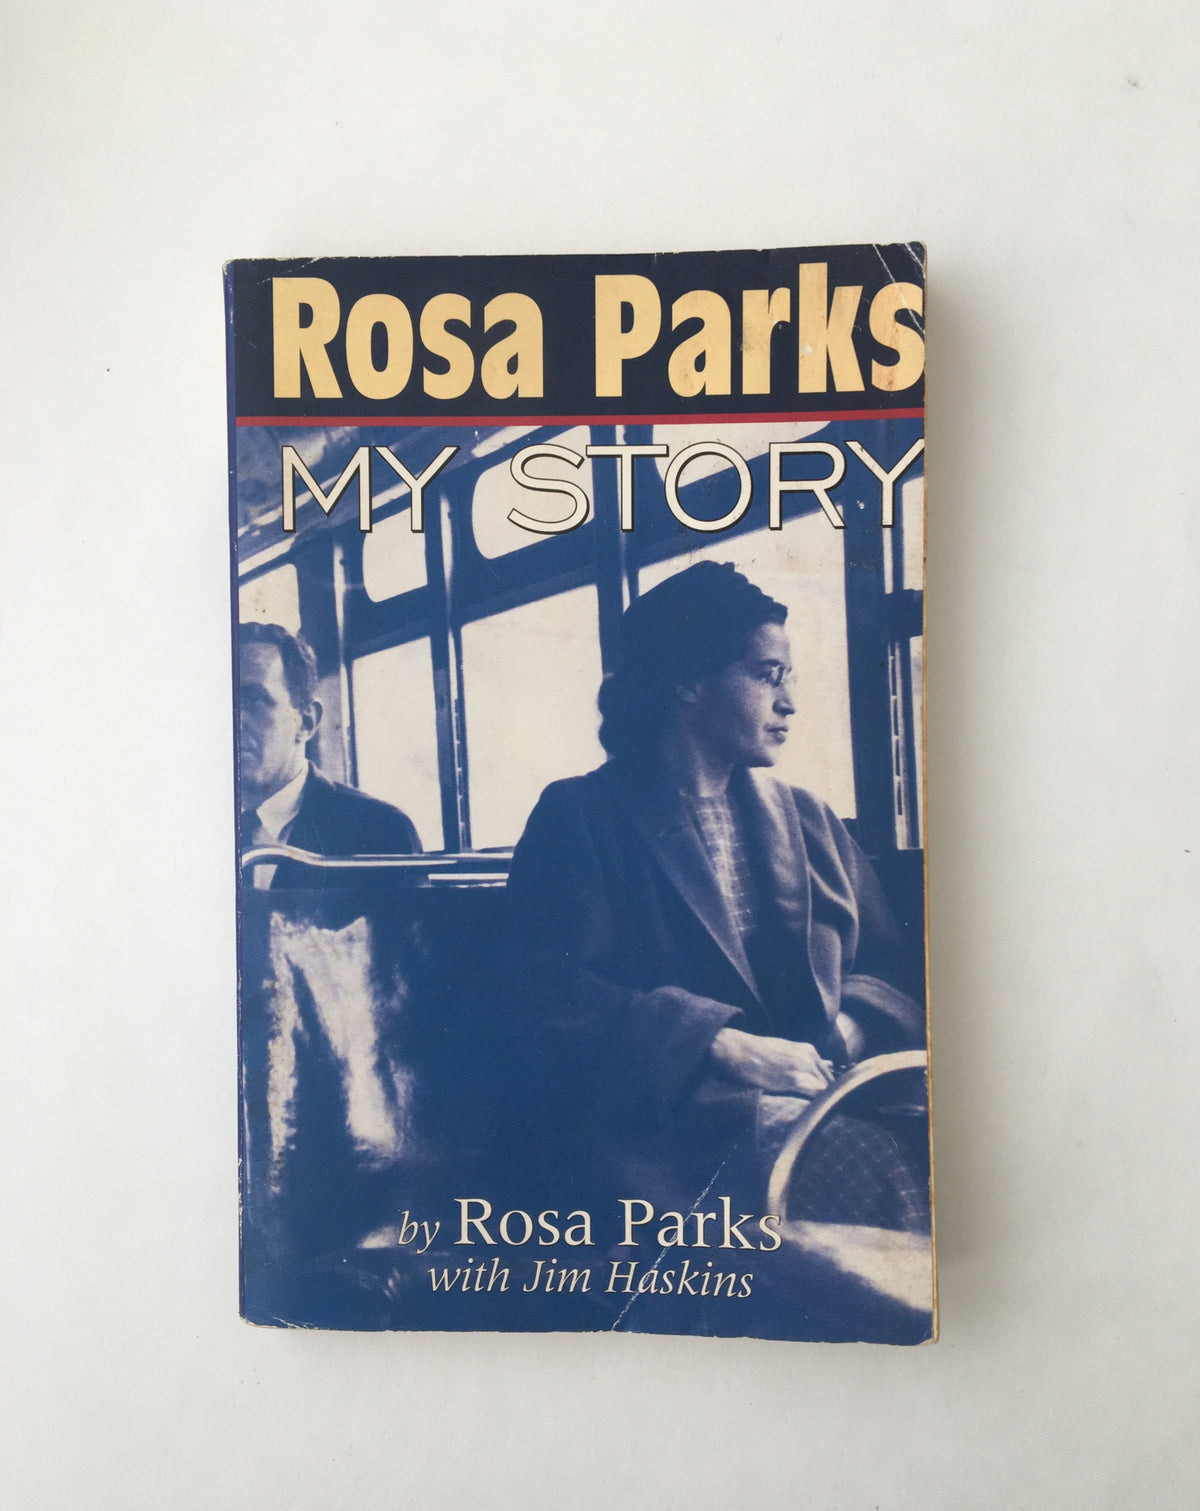 My Story by Rosa Parks